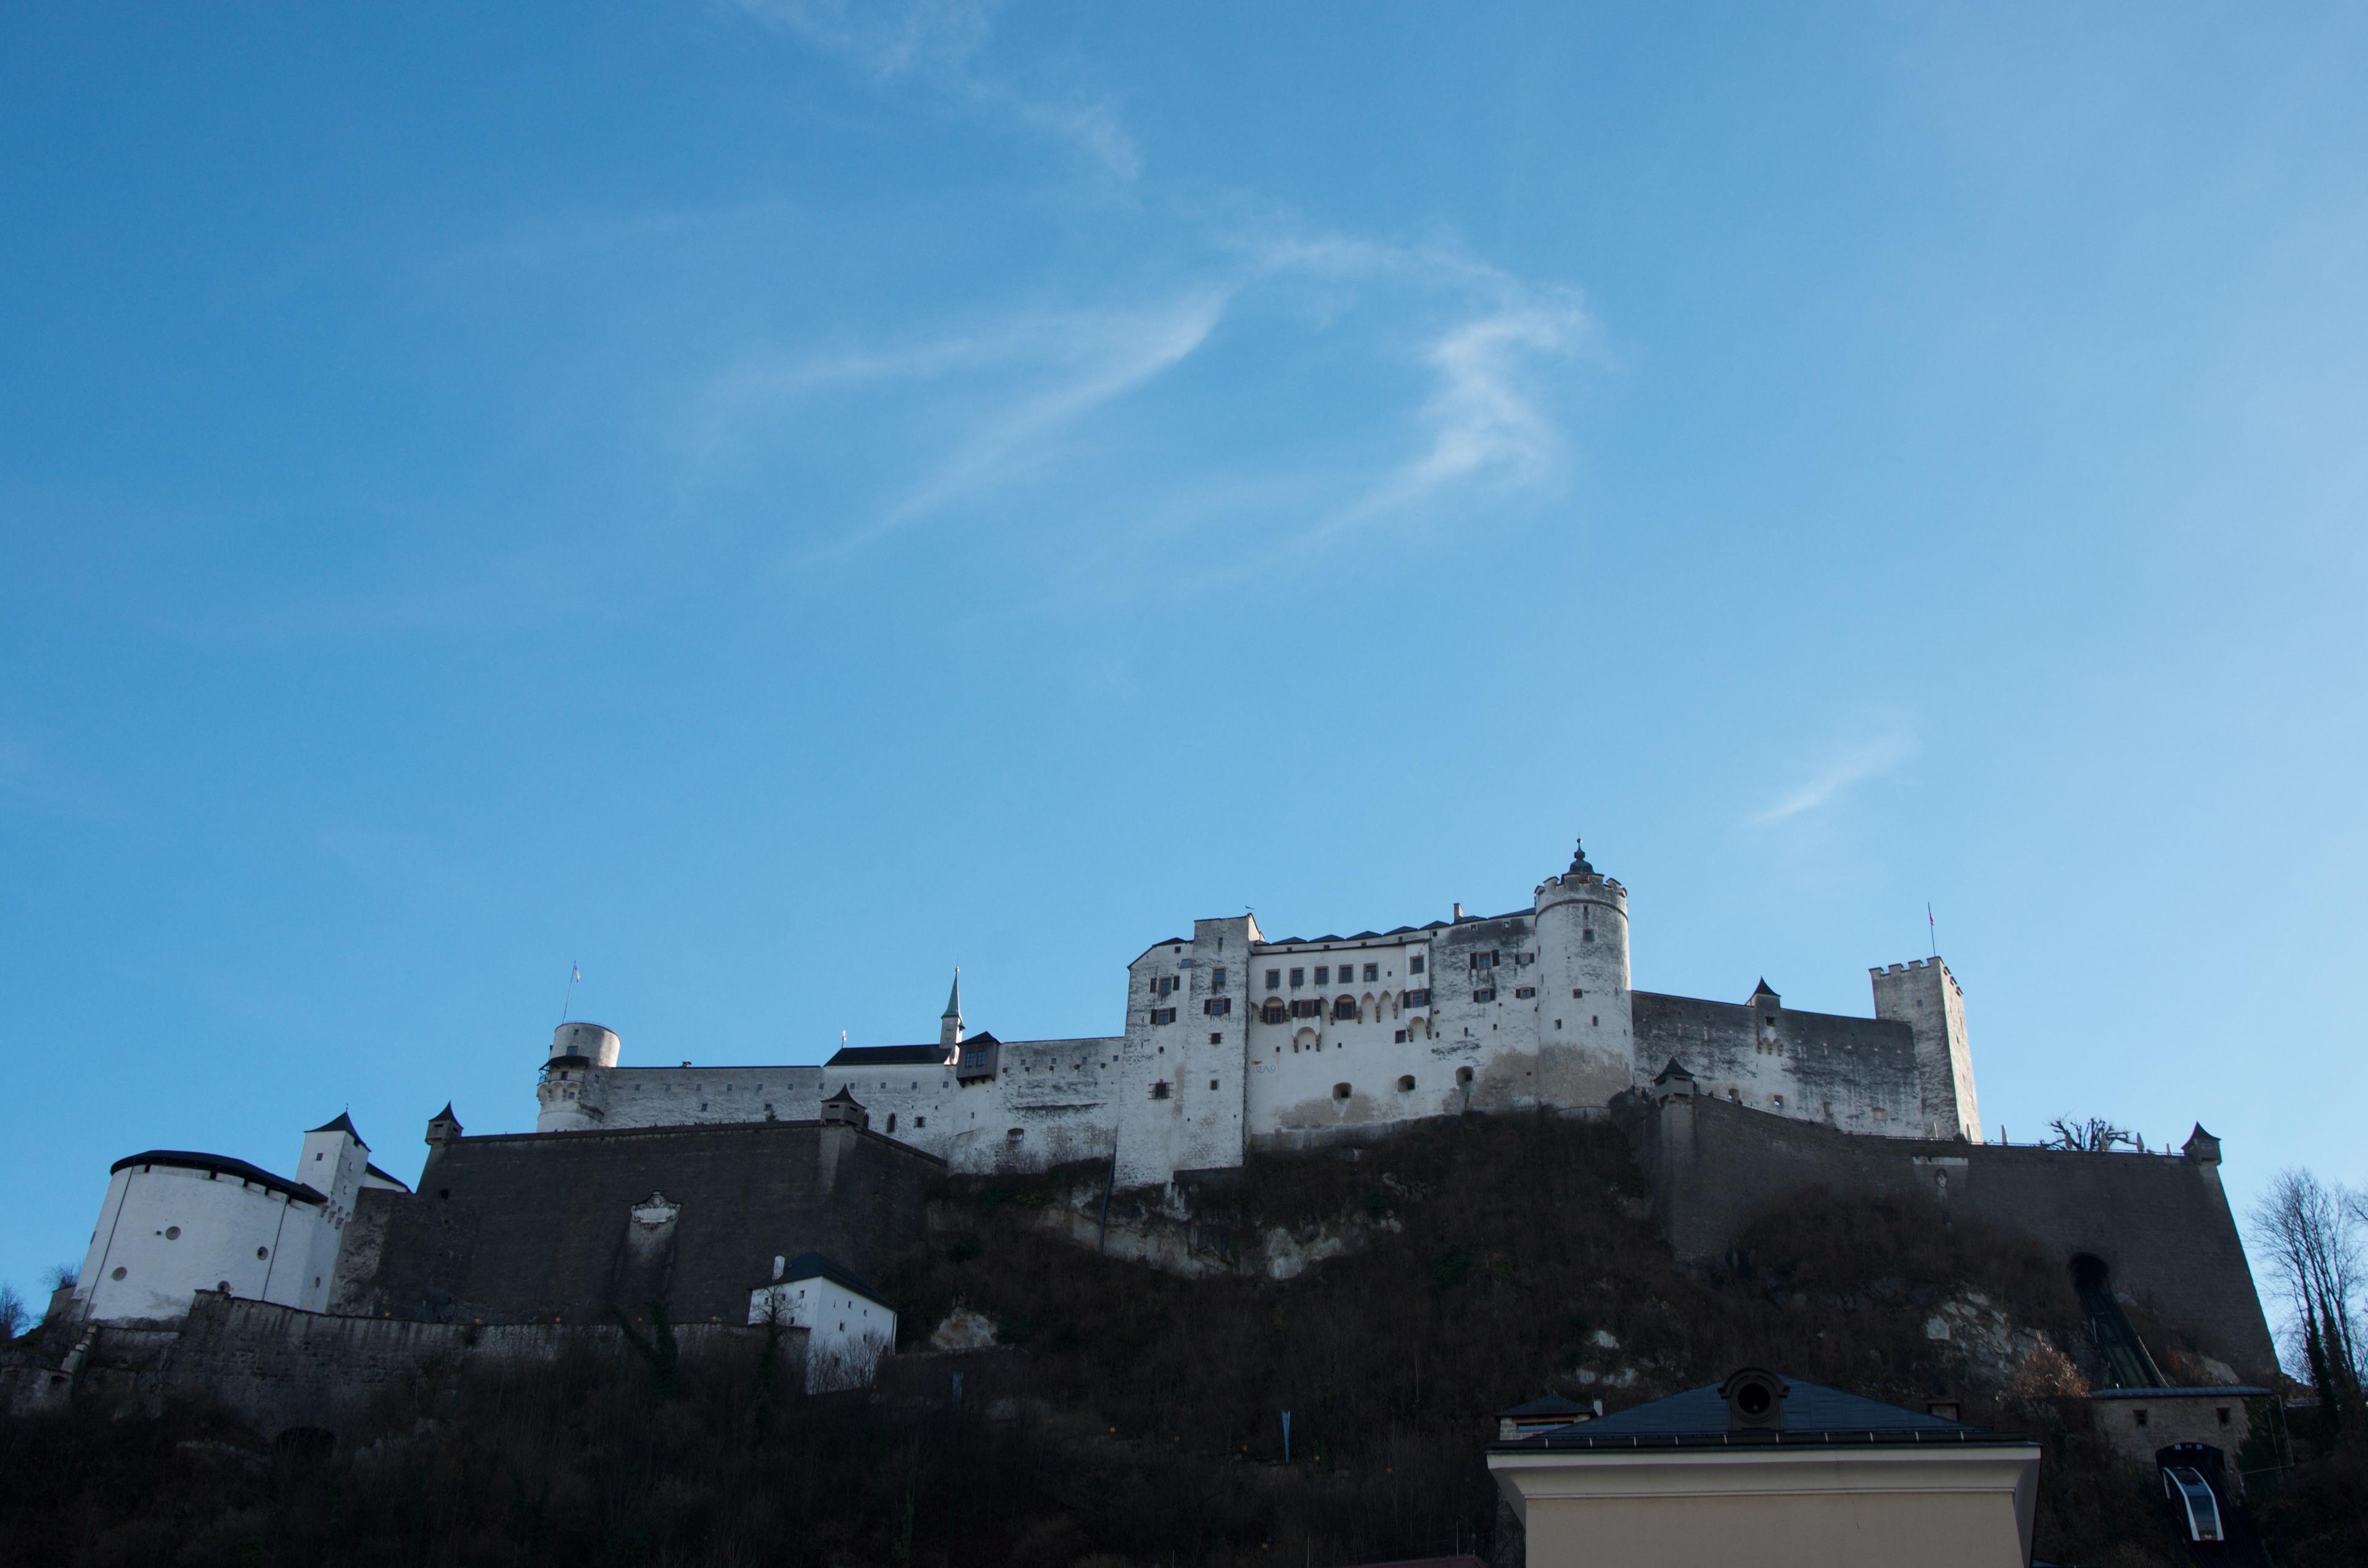 Cover image of this place Salzburg Fortress